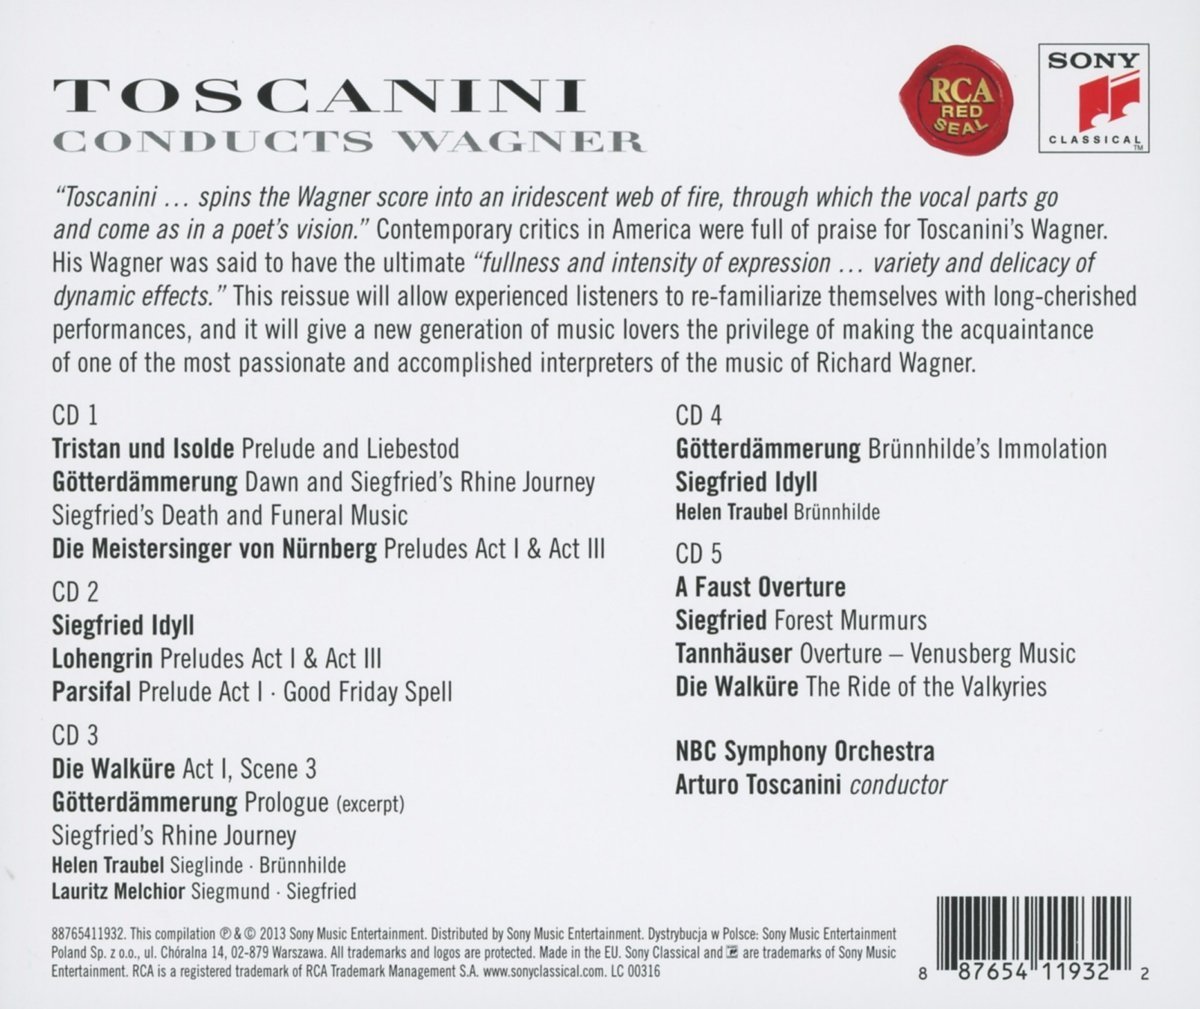 Sony Masterworks new release Toscanini Conducts Wagner